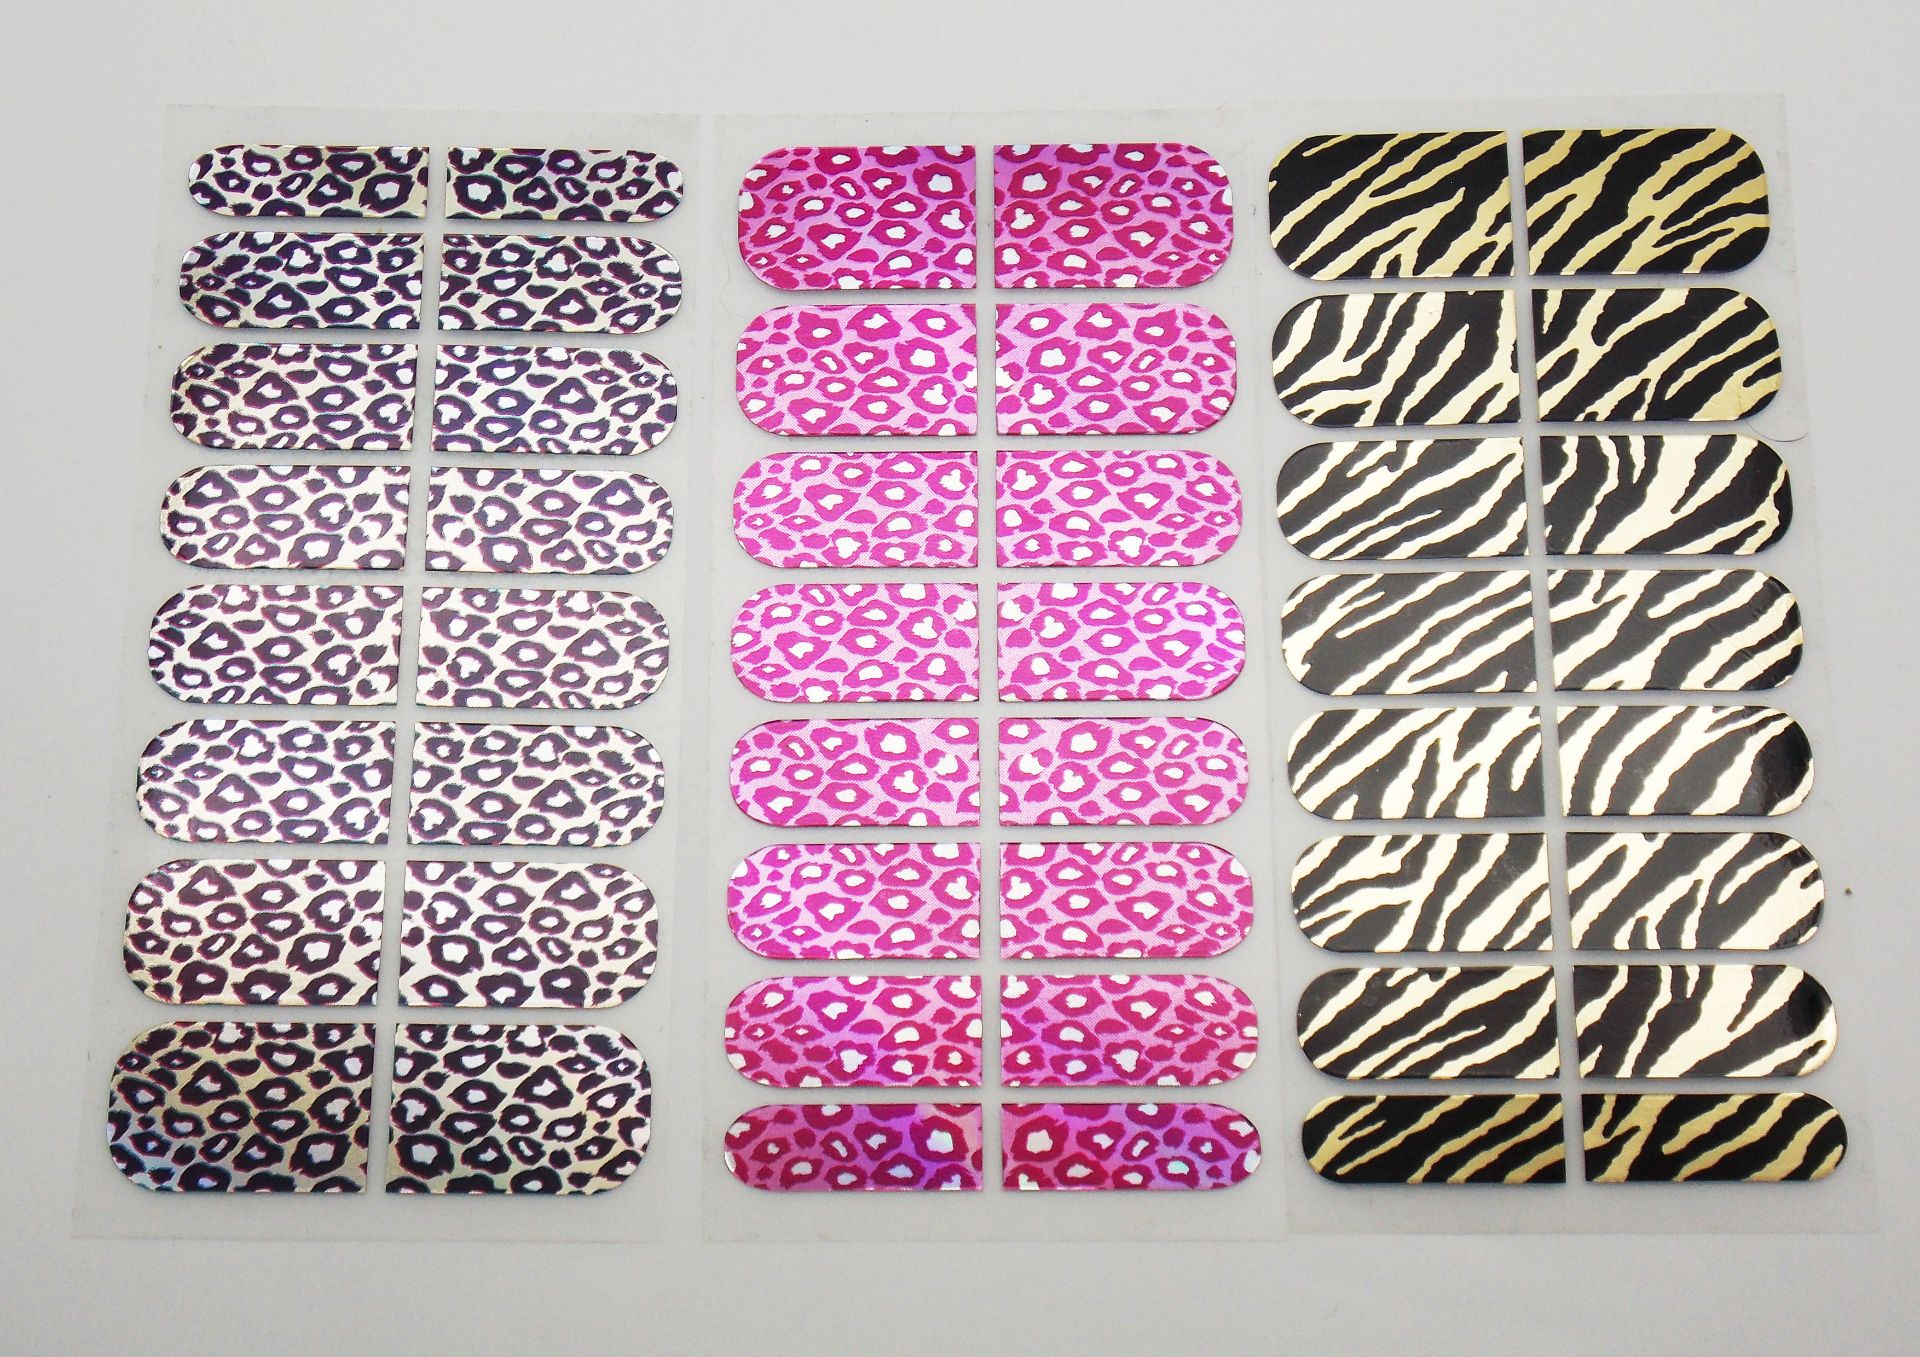 144 Packs Of Professional Nail Art Wrap Transfers - 3 Different Animal Print Styles - Image 2 of 9